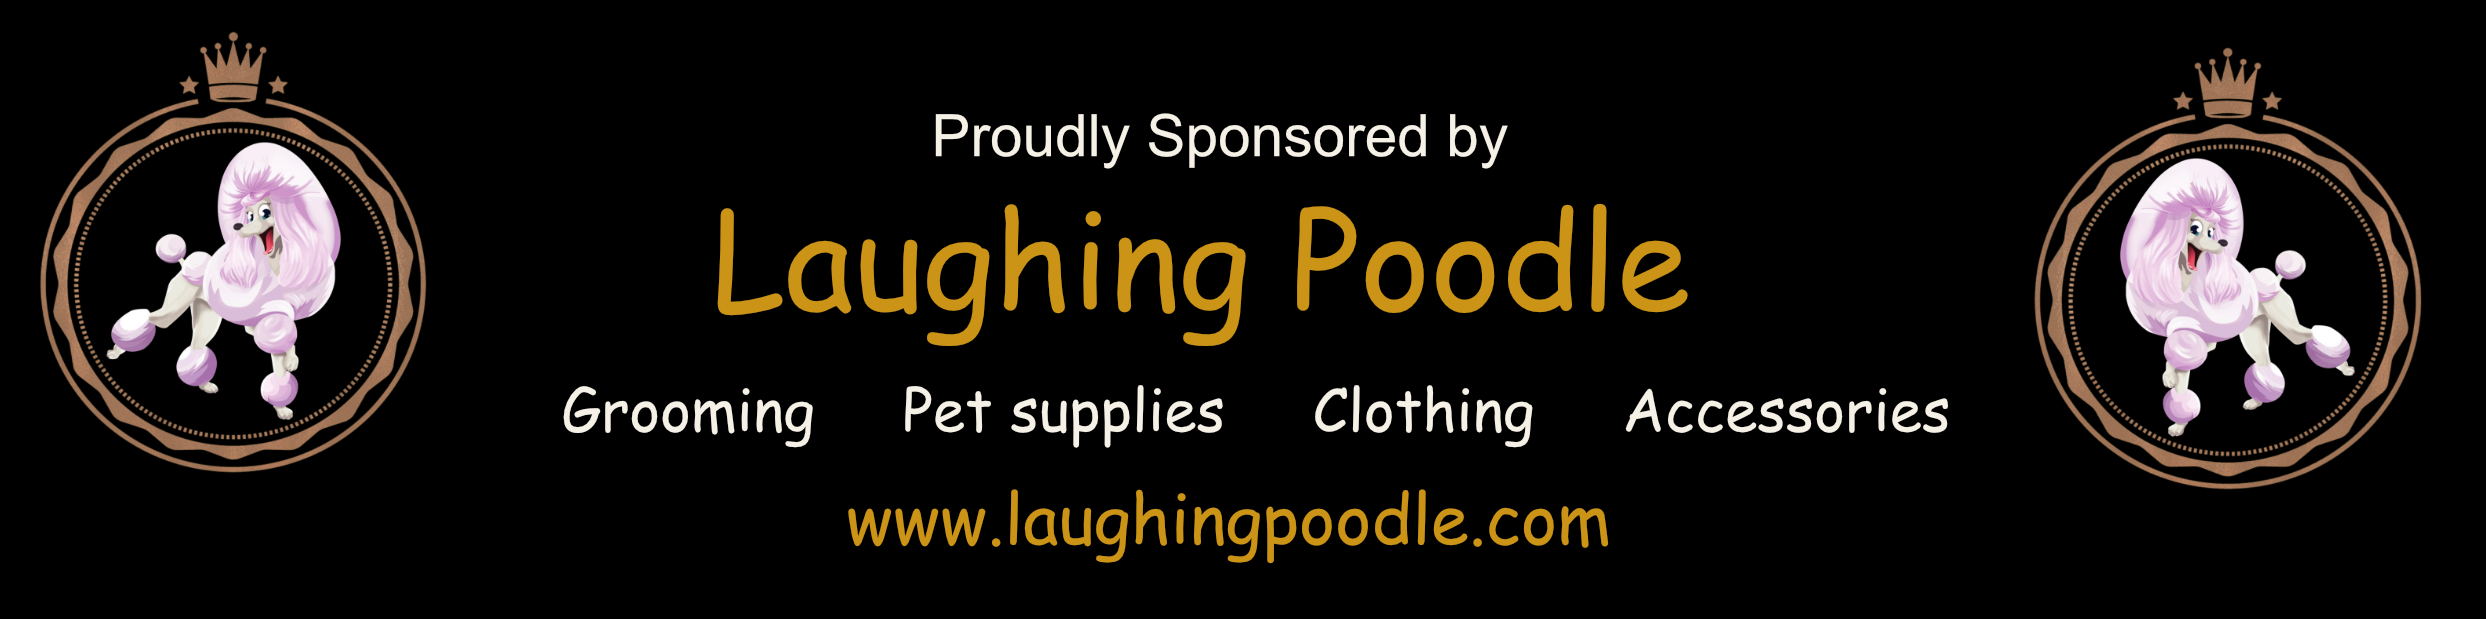 Laughing Poodle